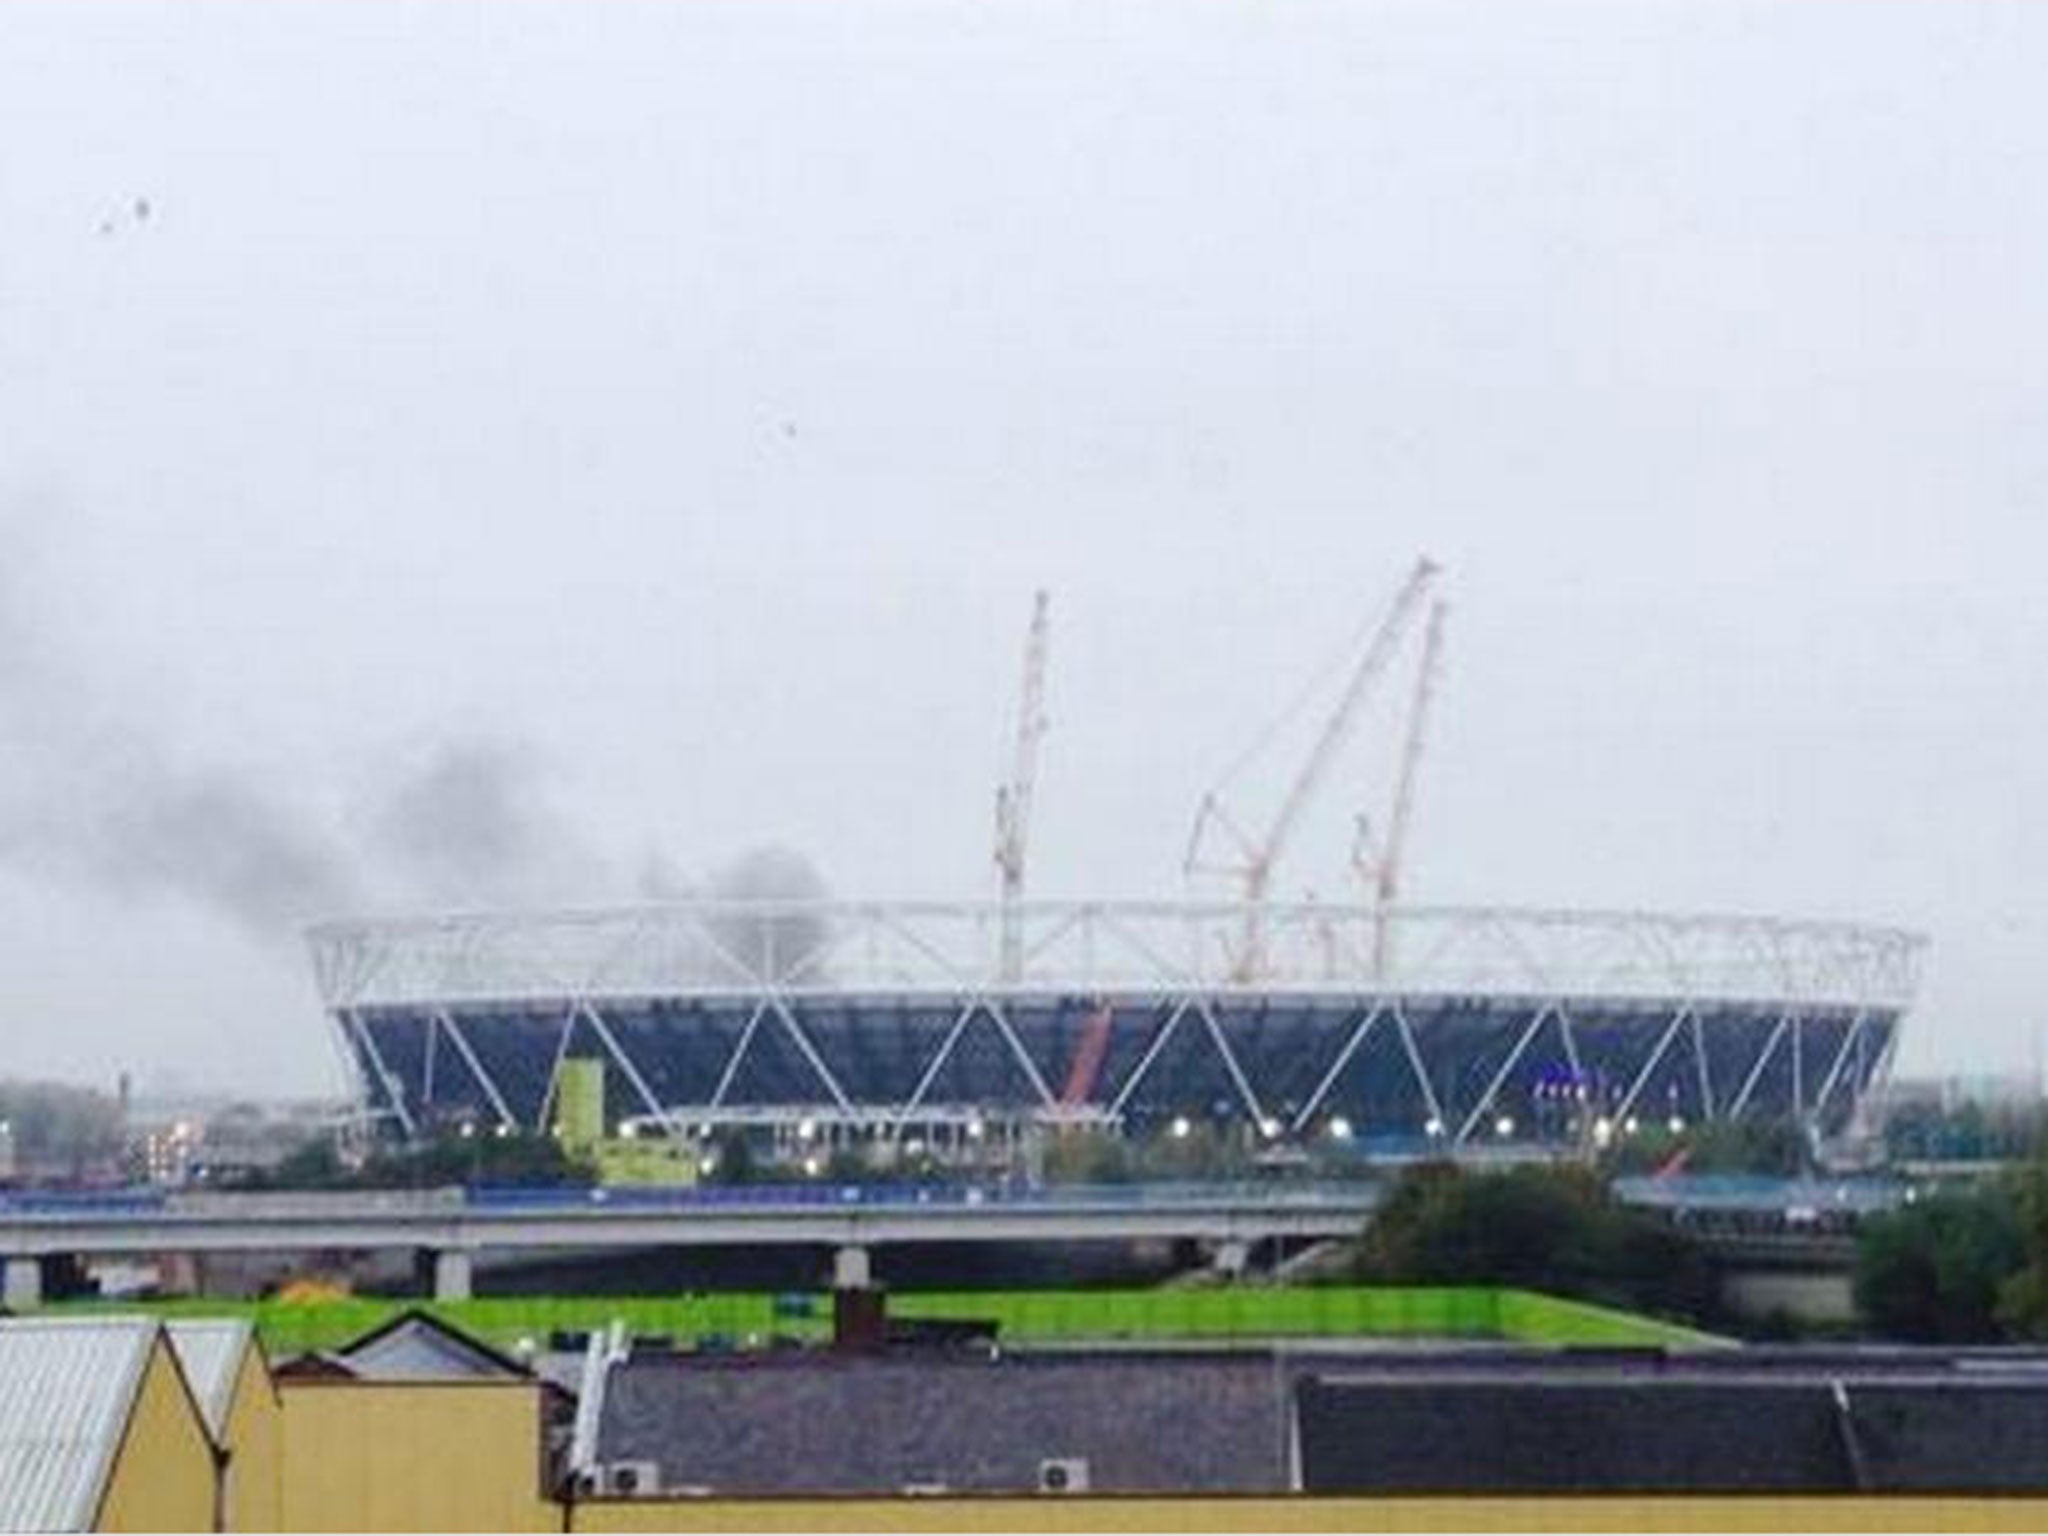 Smoke could be seen rising from the Olympic Stadium. Photo: Adam Rivers